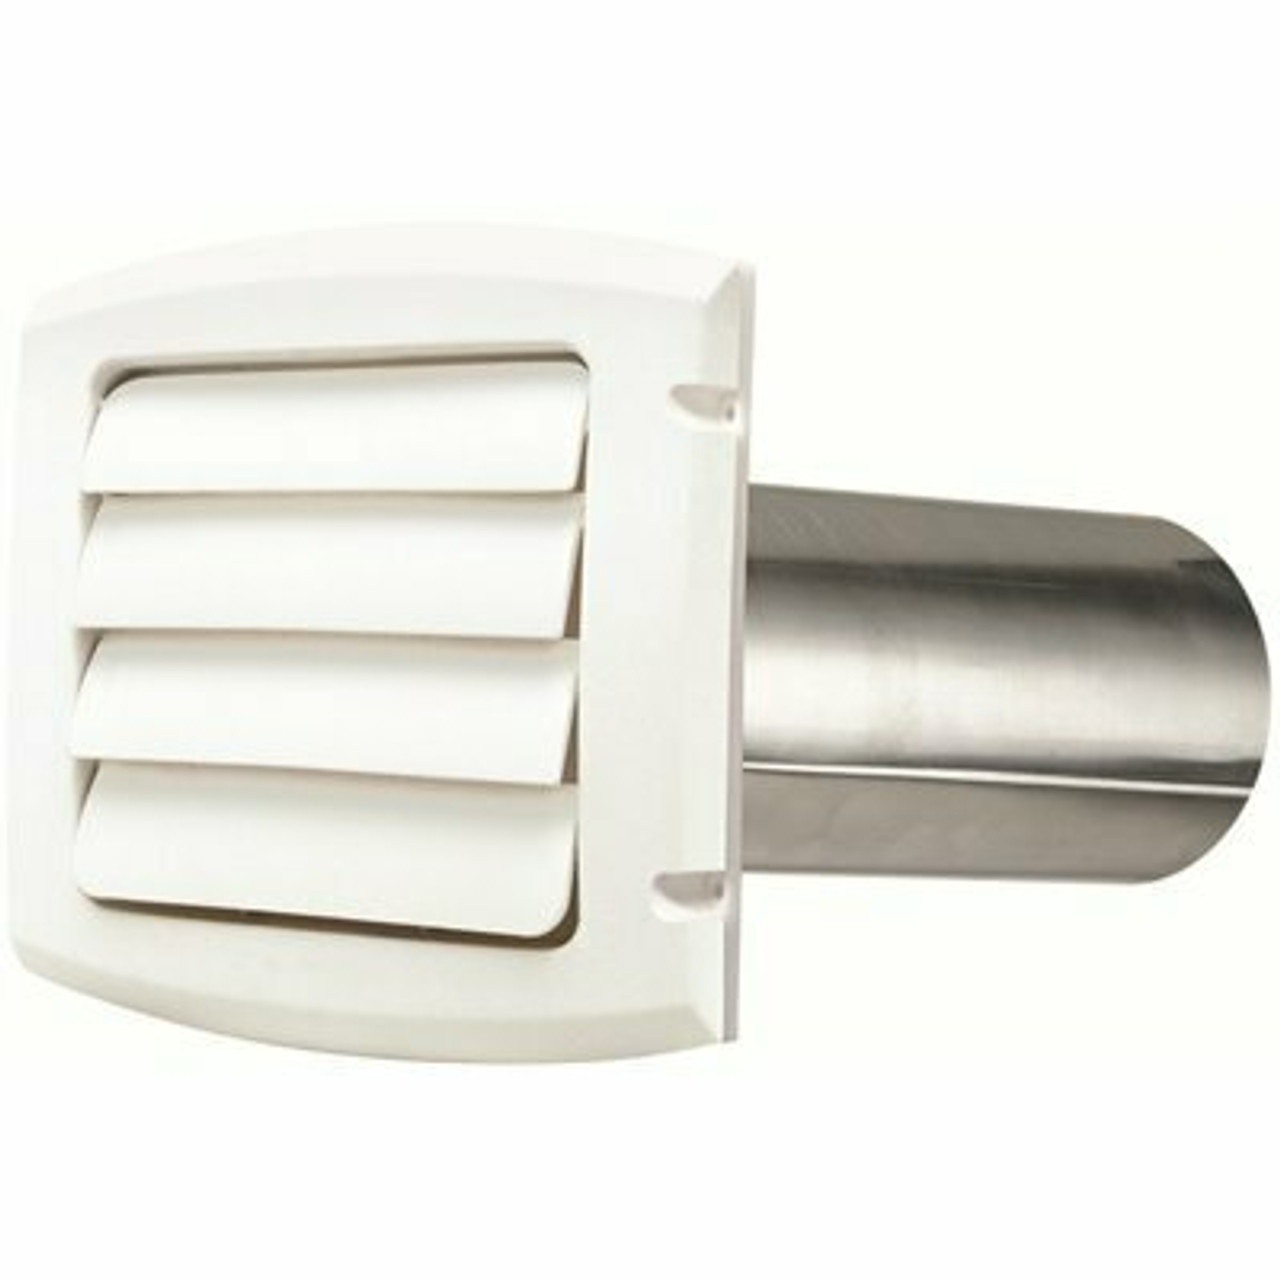 Everbilt 6 In. Louvered Exhaust Hood In White